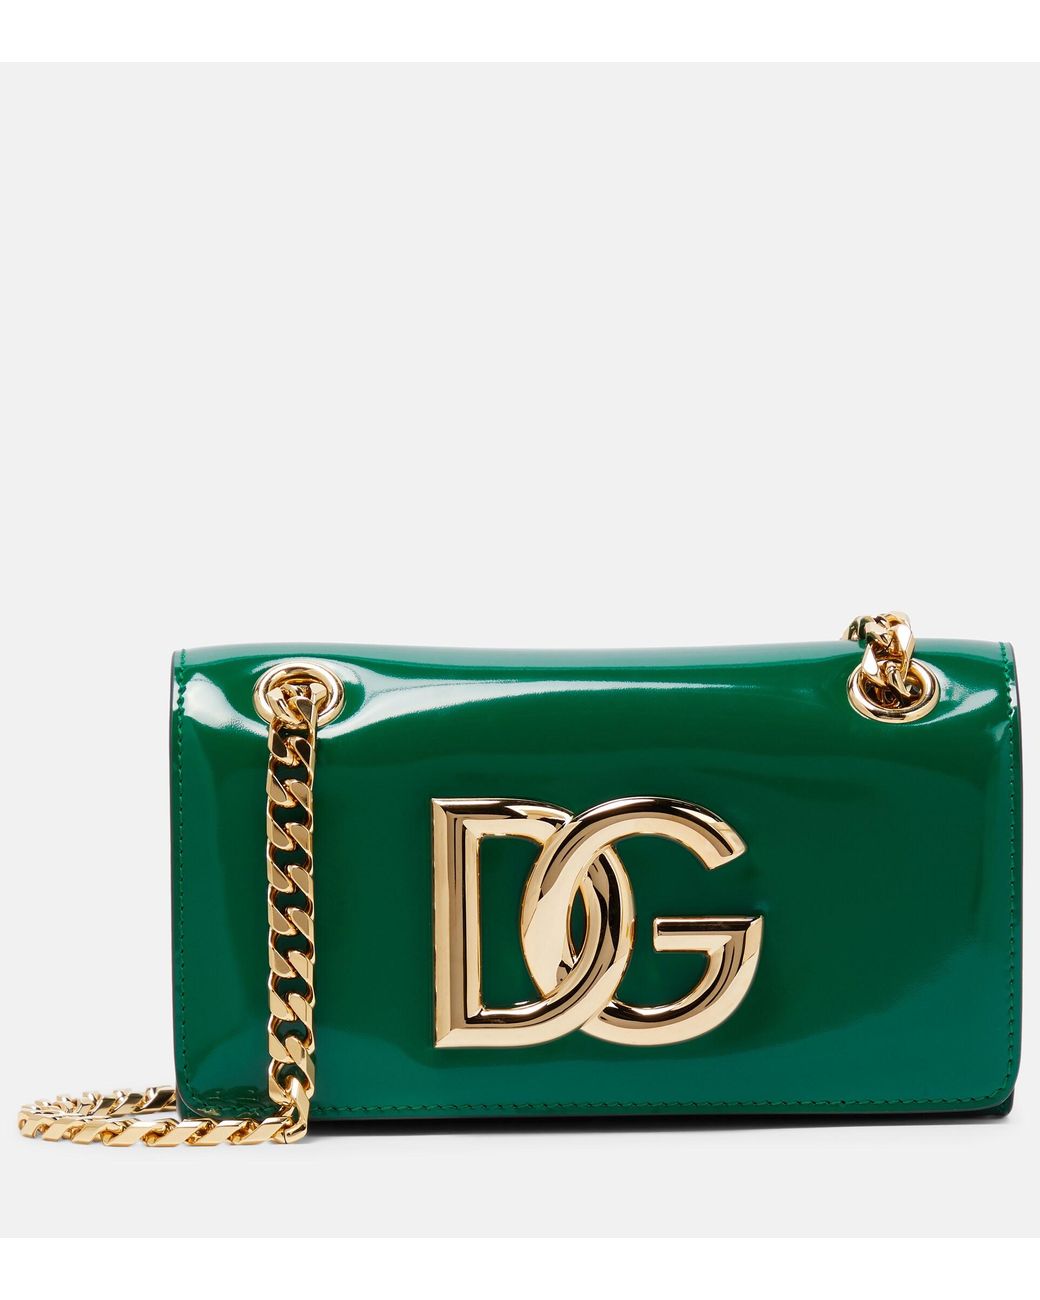 Dolce & Gabbana 3.5 Patent Leather Crossbody Bag in Green | Lyst